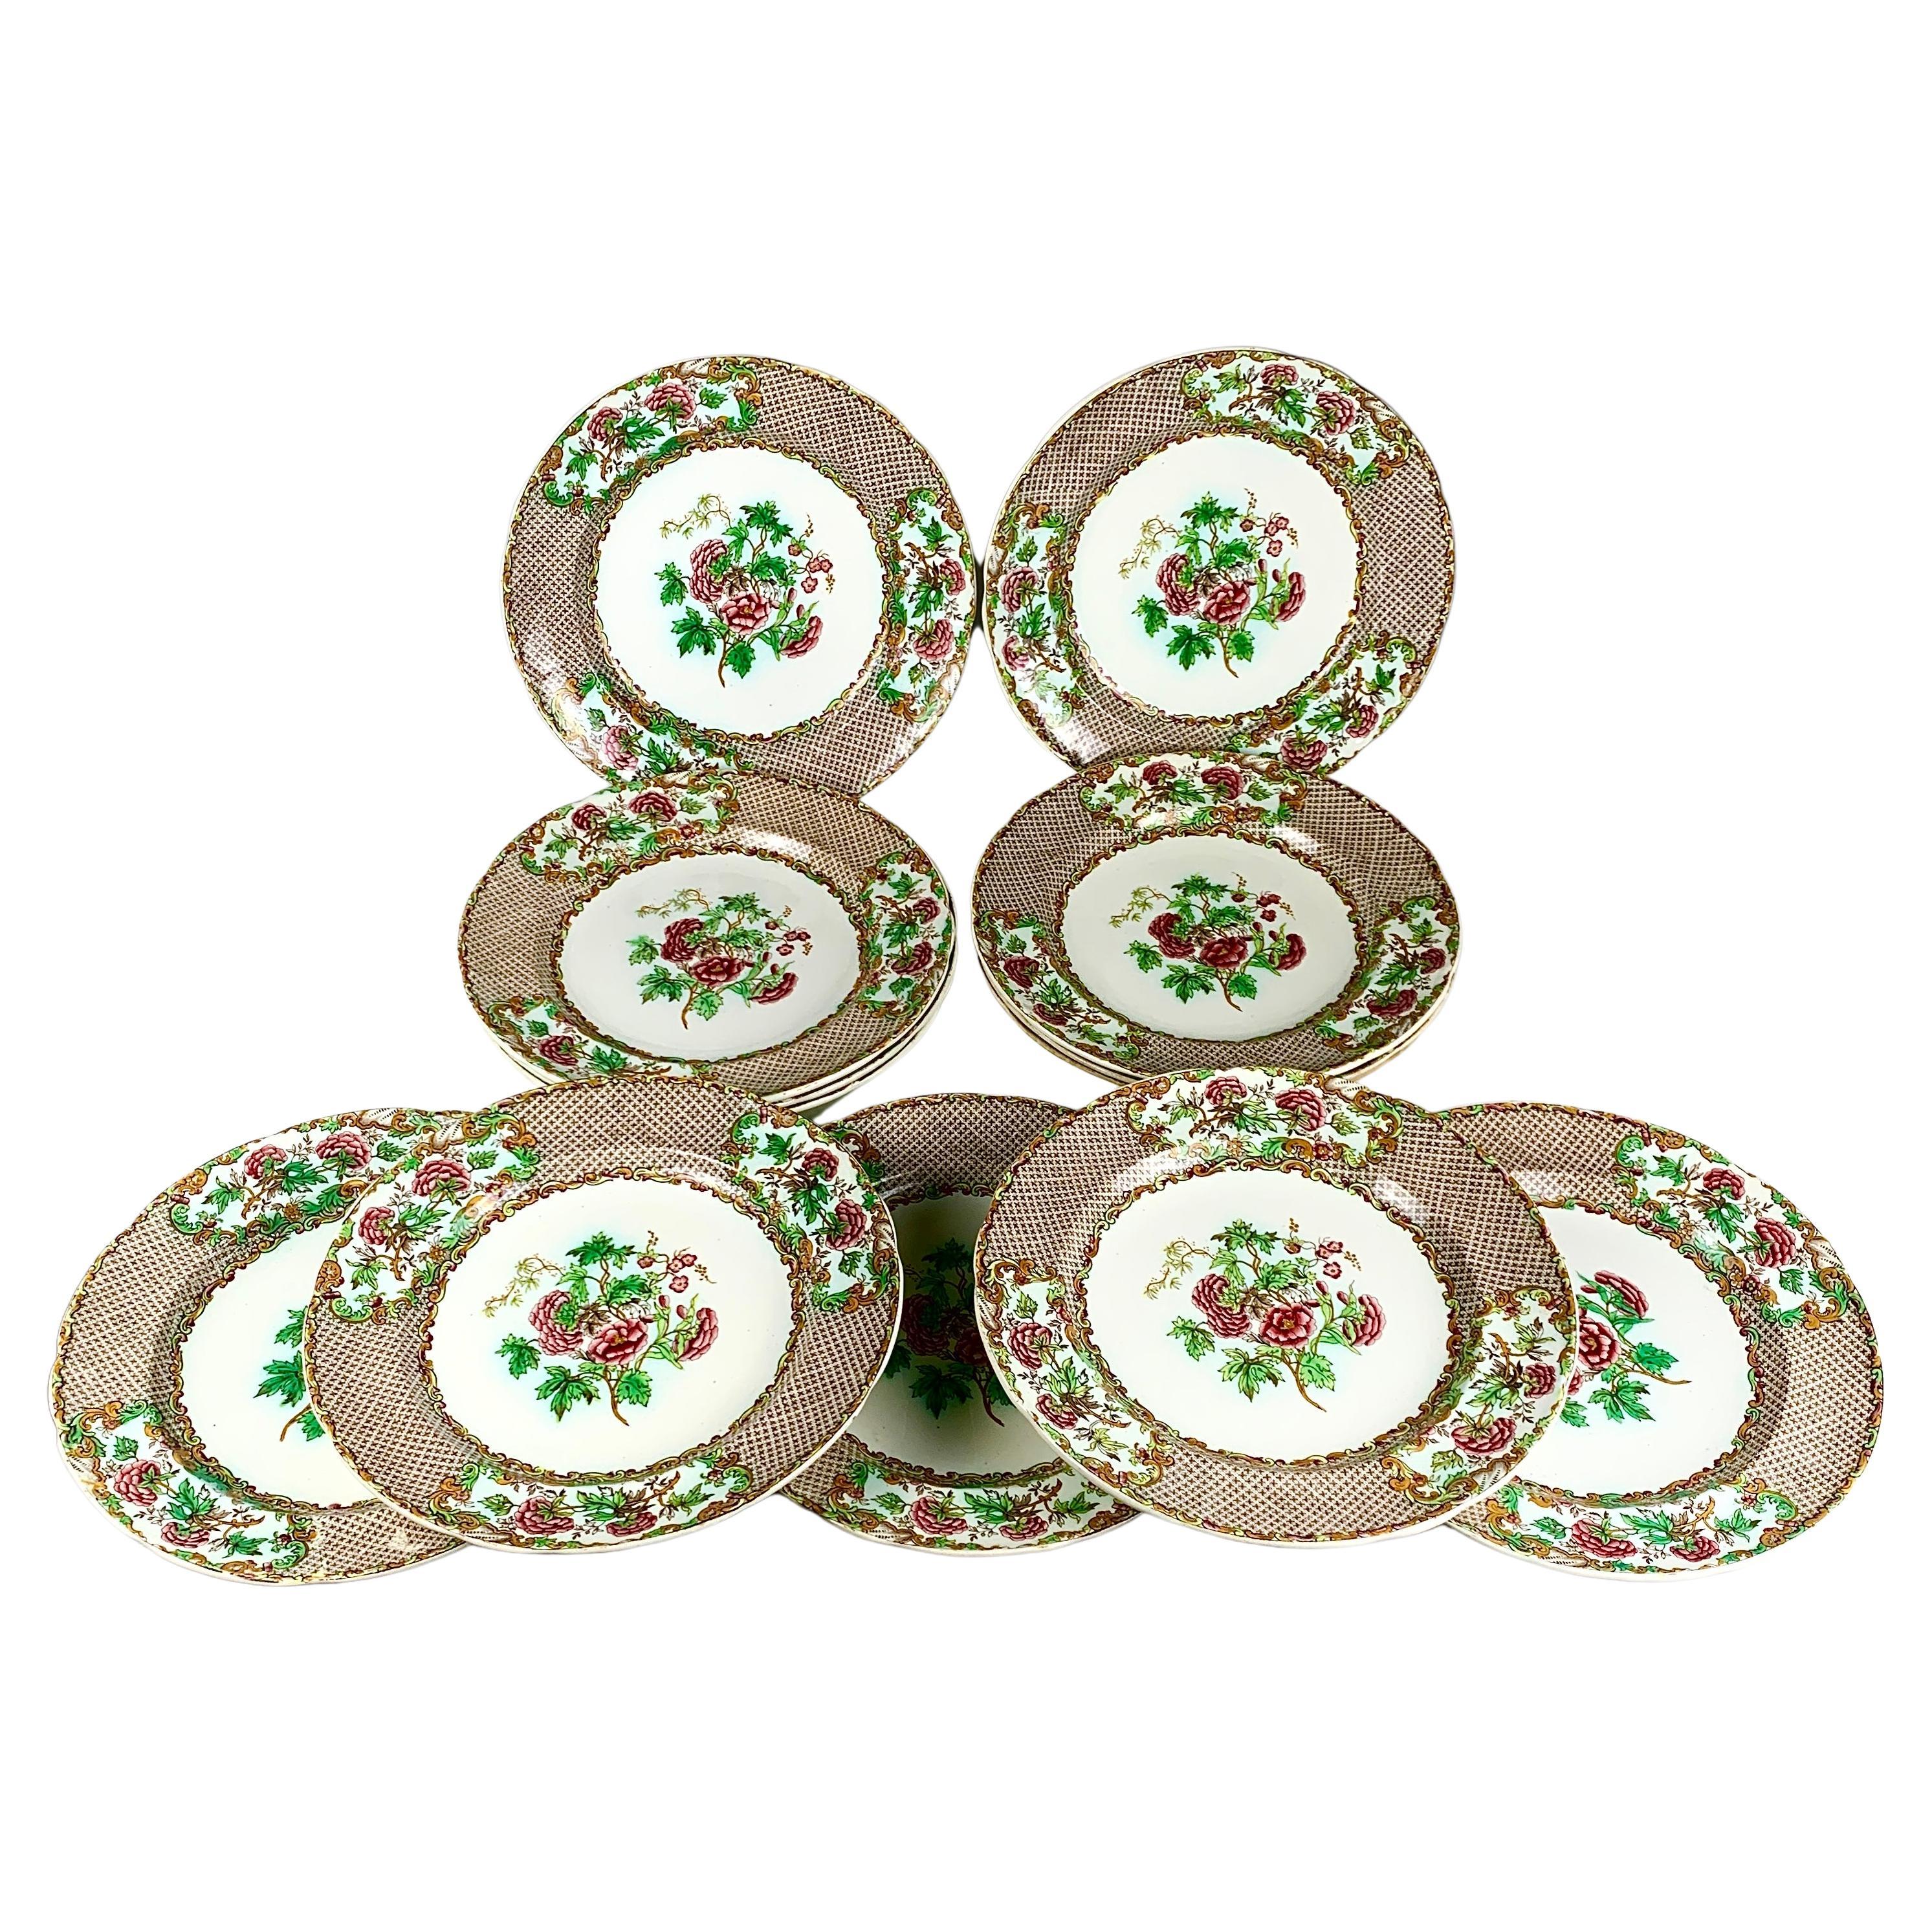 Dozen Antique Spode Dinner Plates with Pink Roses and Green Leaves Border C-1837 For Sale